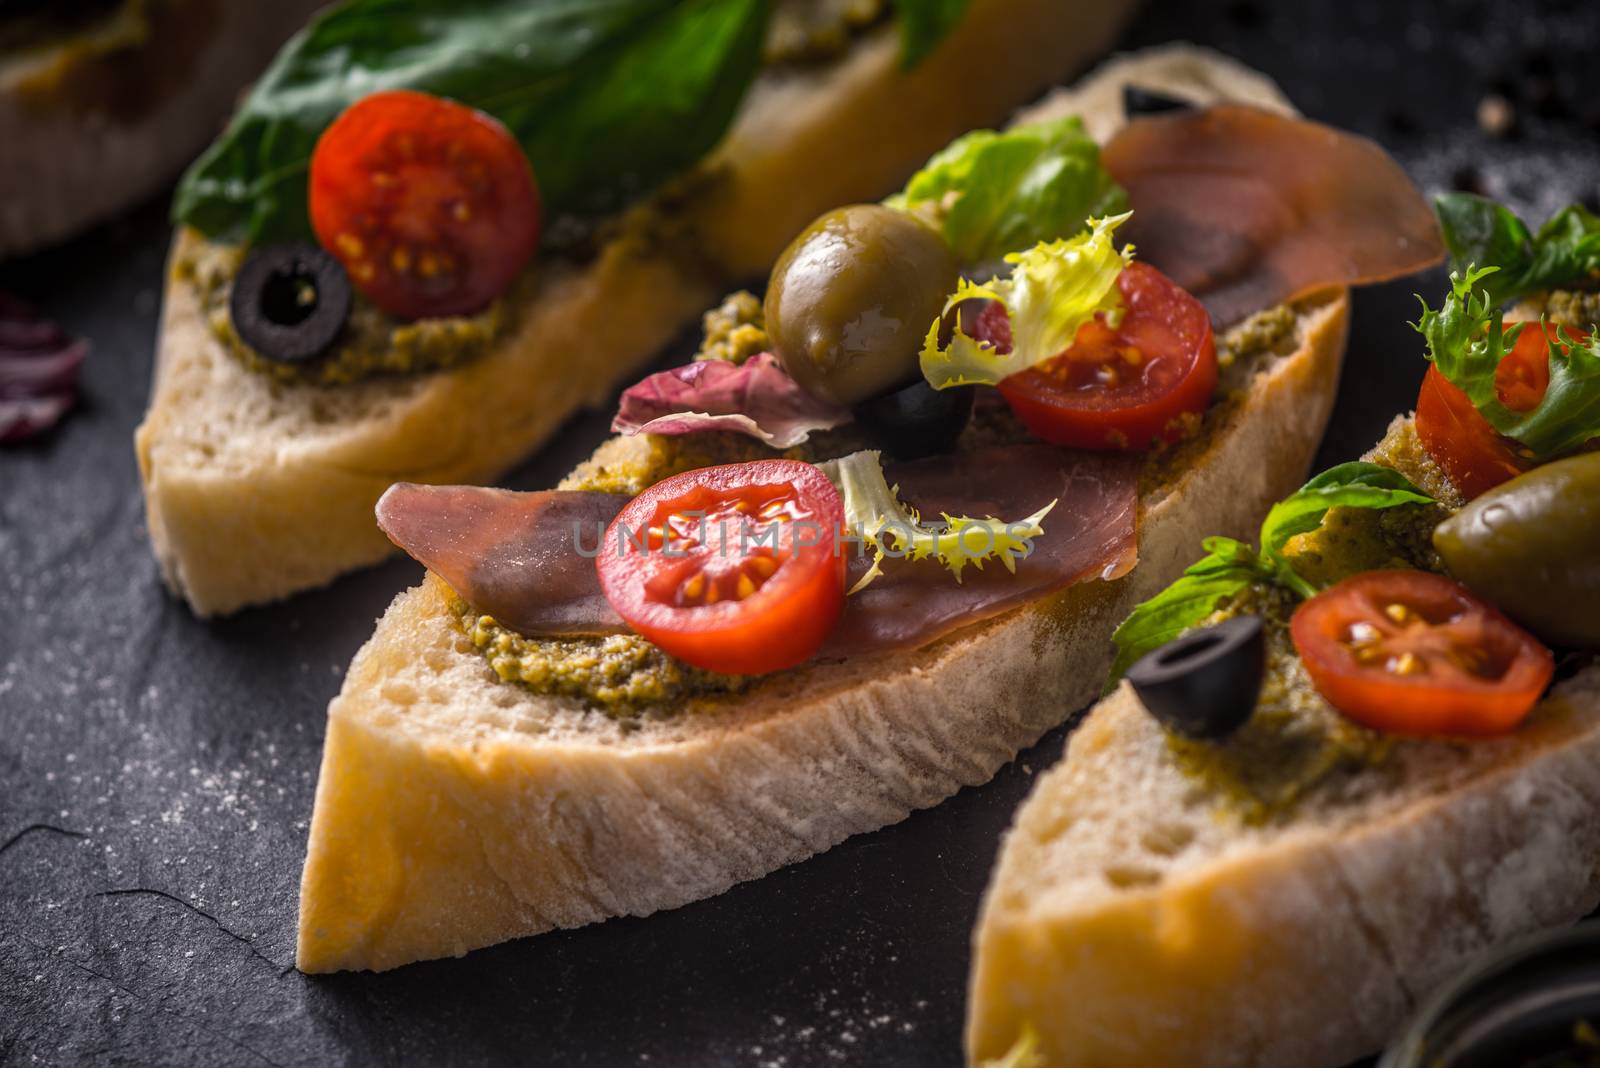 Slices of ciabatta with olives , tomatoes and basil on the black stone table horizontal